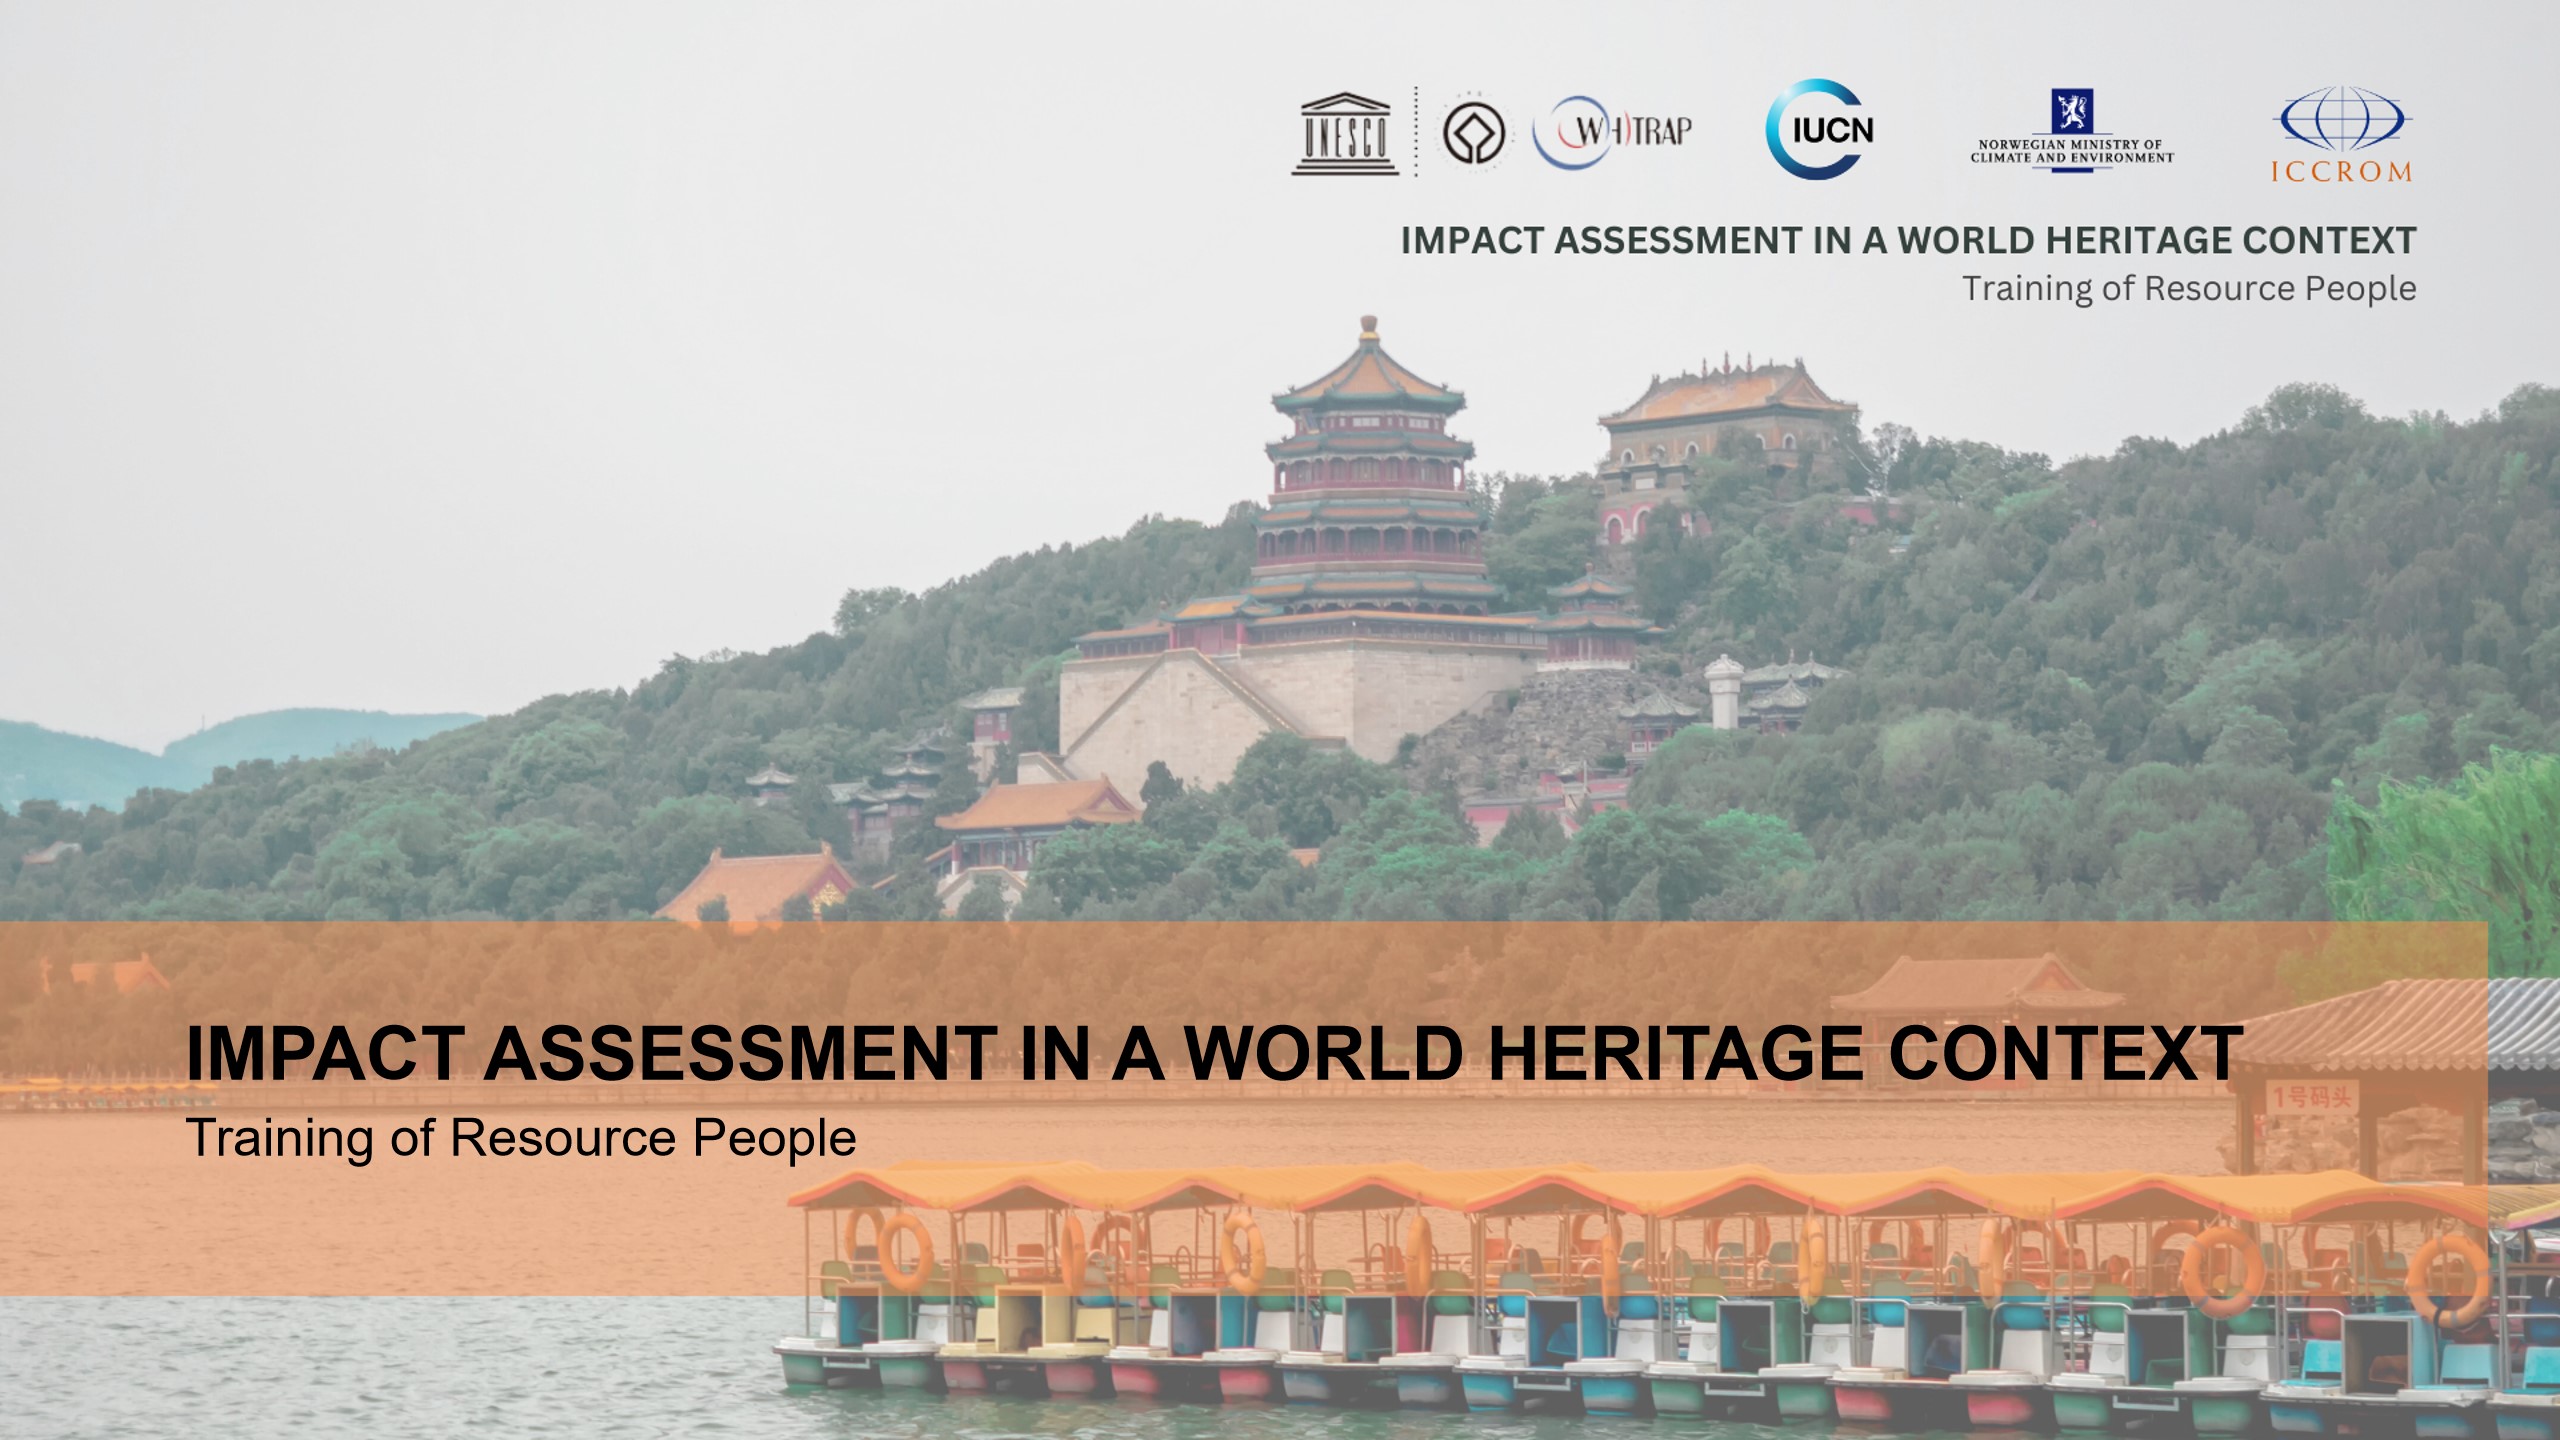 The Training of Resource People on Impact Assessment in a World Heritage Context